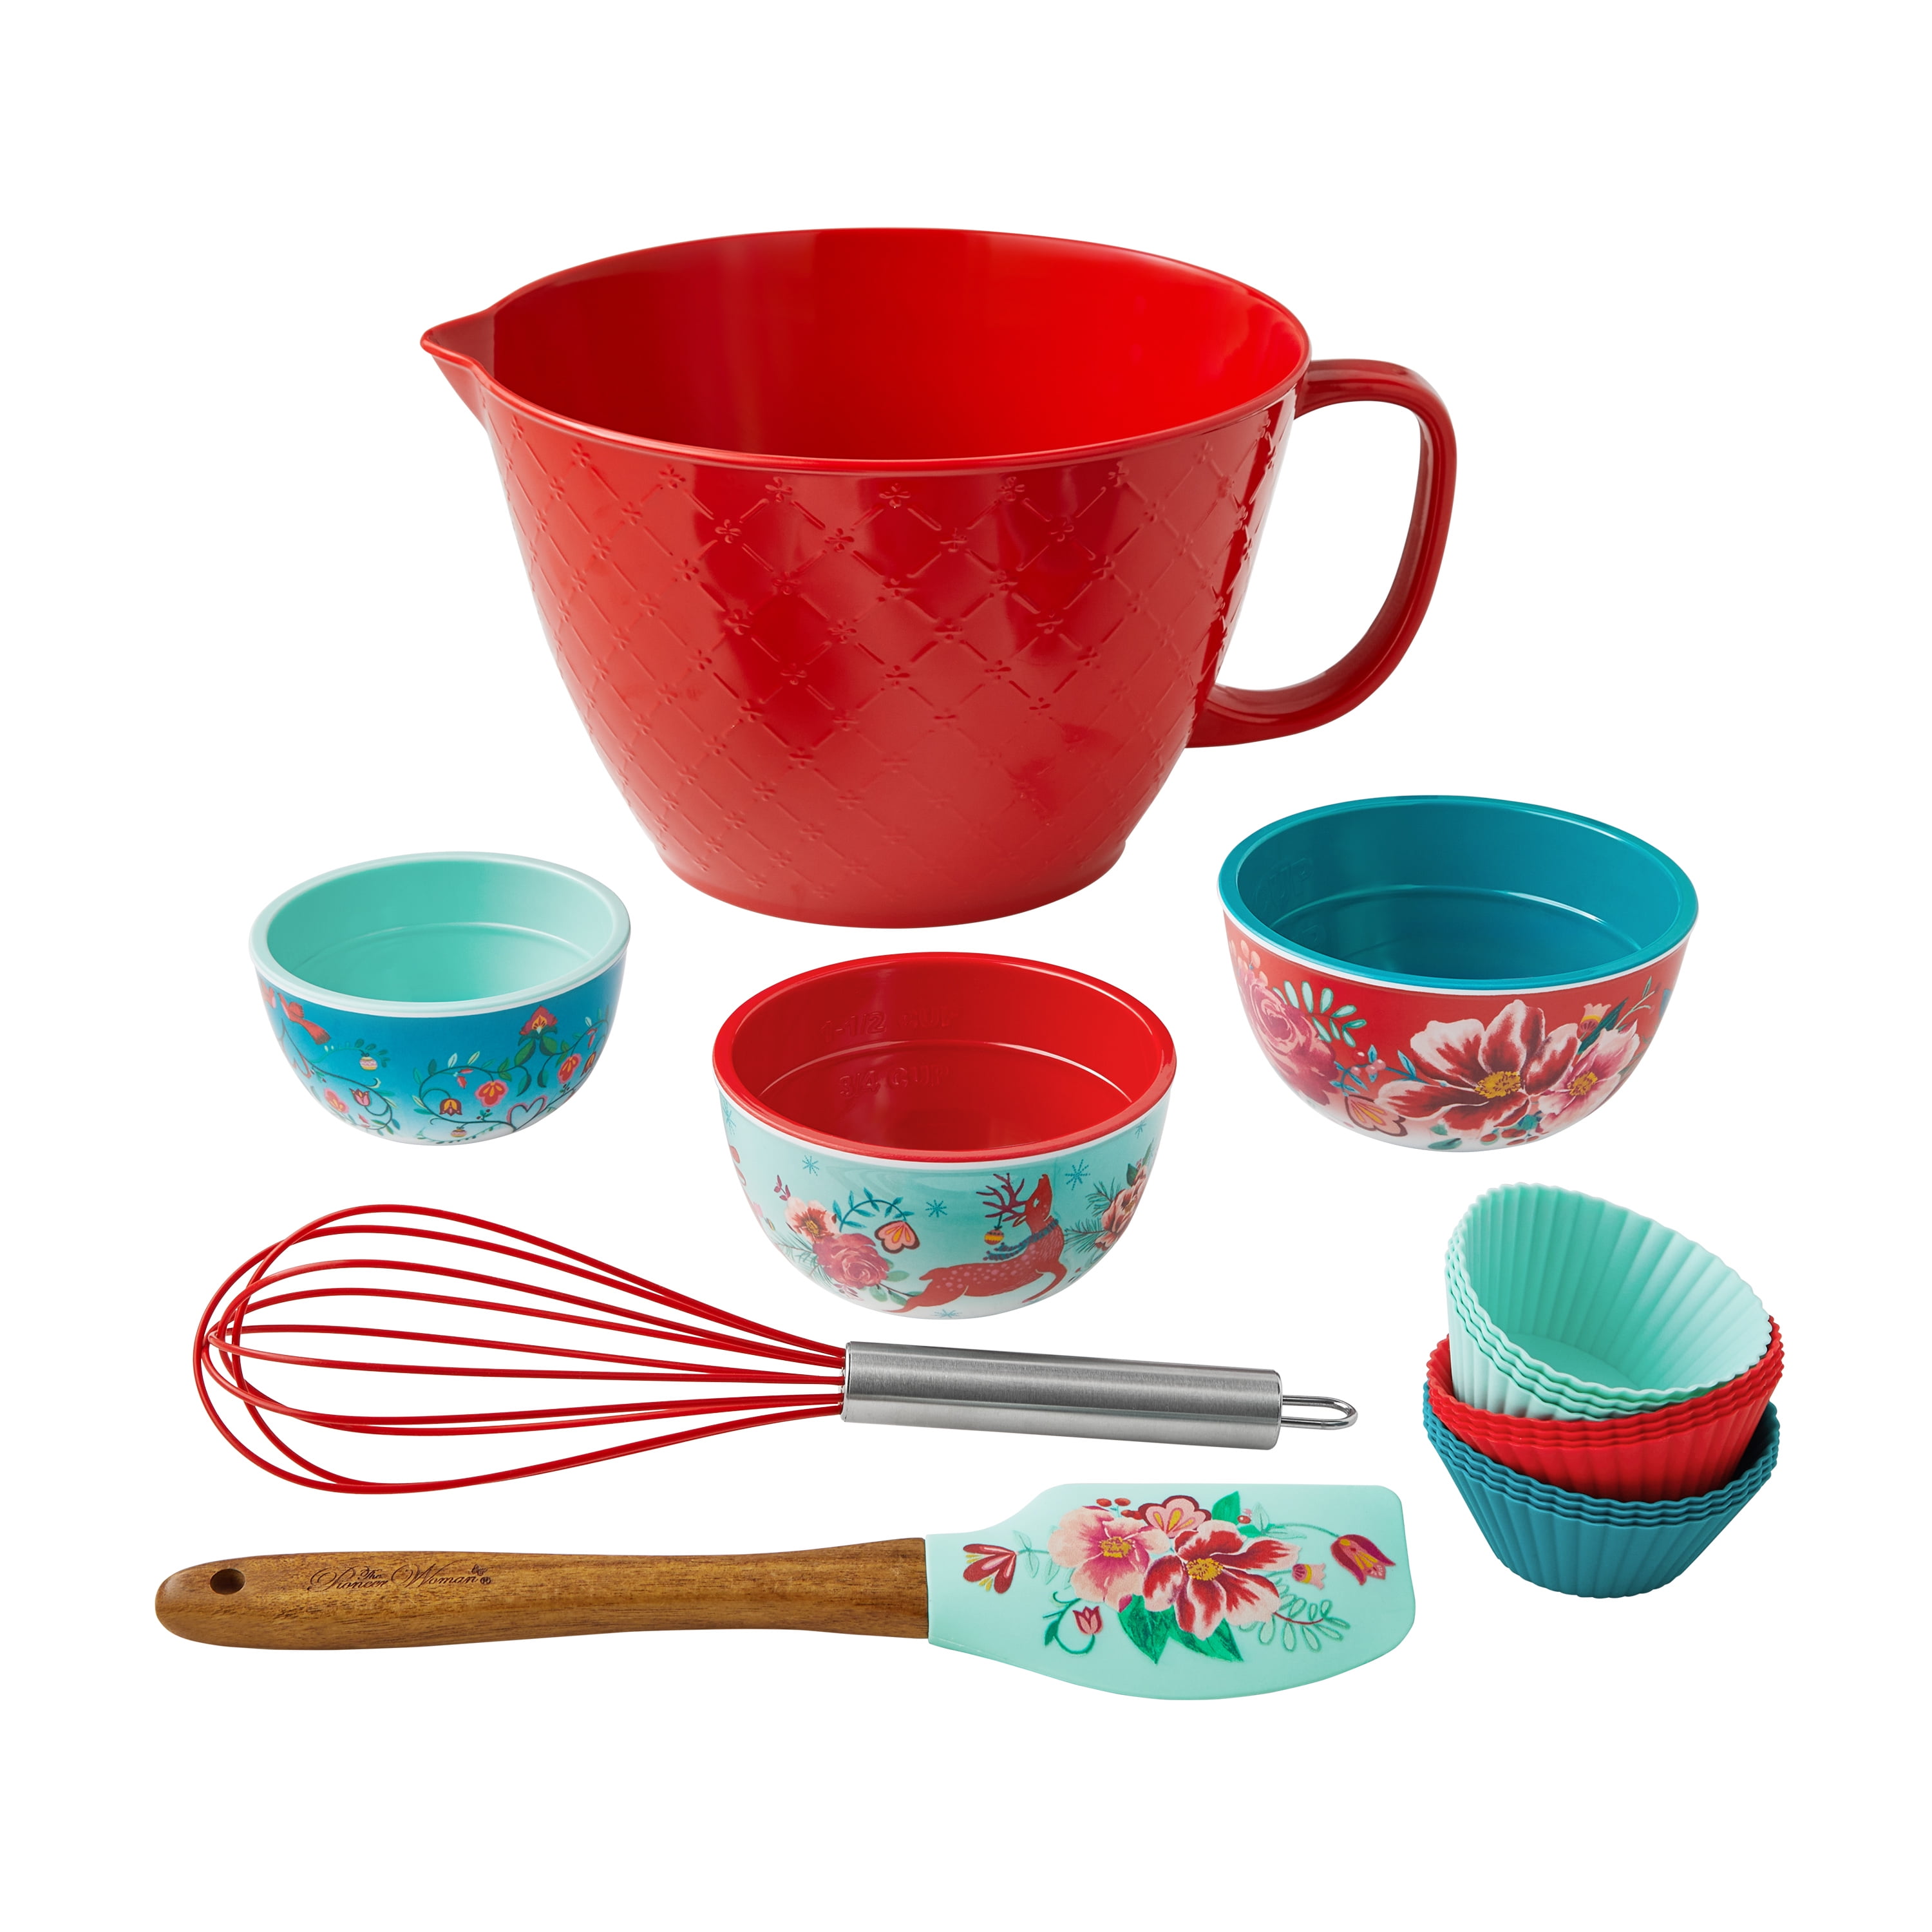 The Pioneer Woman Merry Meadows 10-Piece Melamine Mixing Bowl Set with Lids